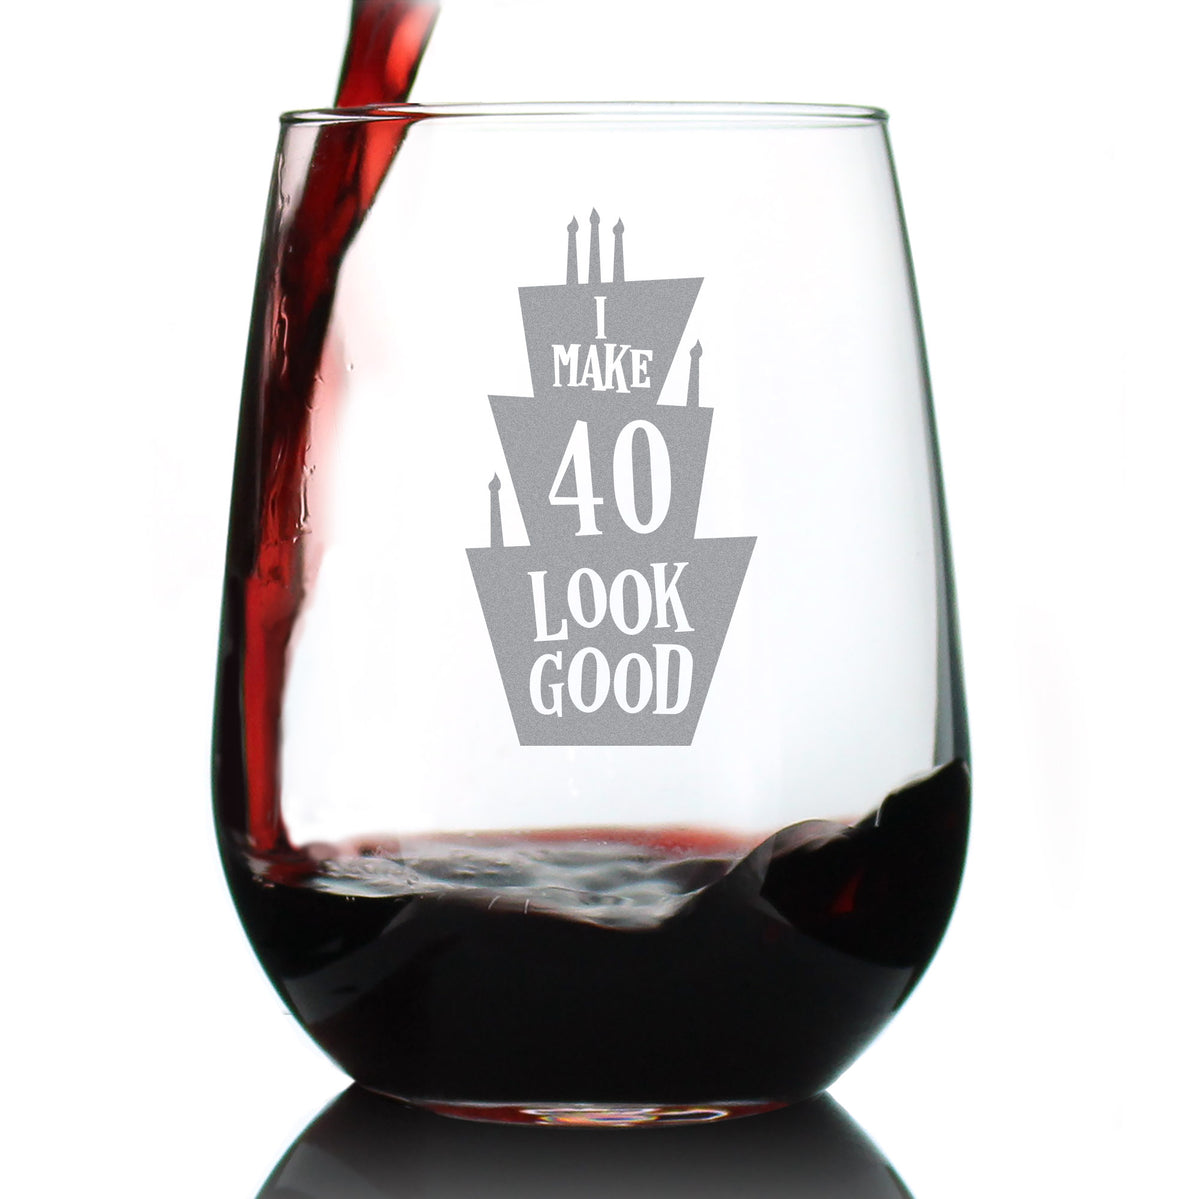 Make 40 Look Good - Funny 40th Birthday Wine Glass for Women Turning 40 - Large 17 Oz - Bday Party Decorations